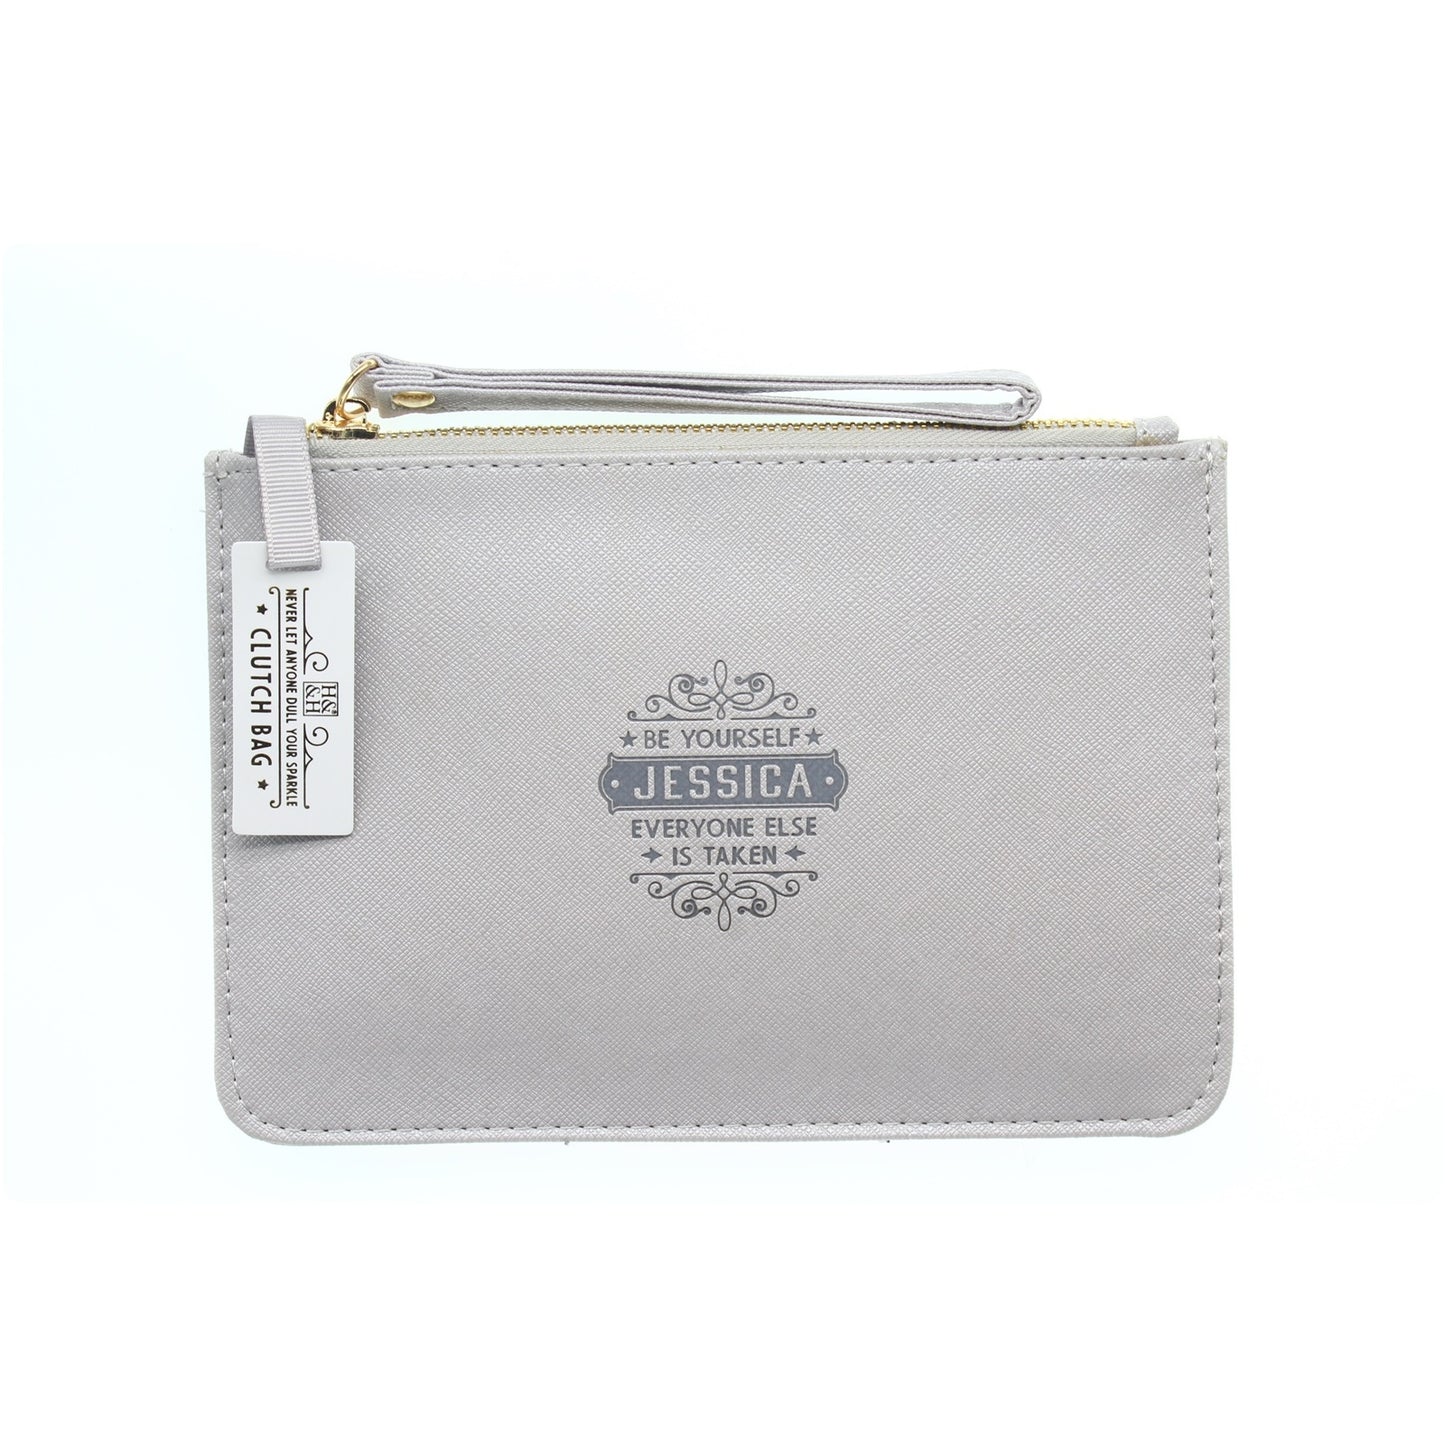 Clutch Bag With Handle & Embossed Text "Jessica"